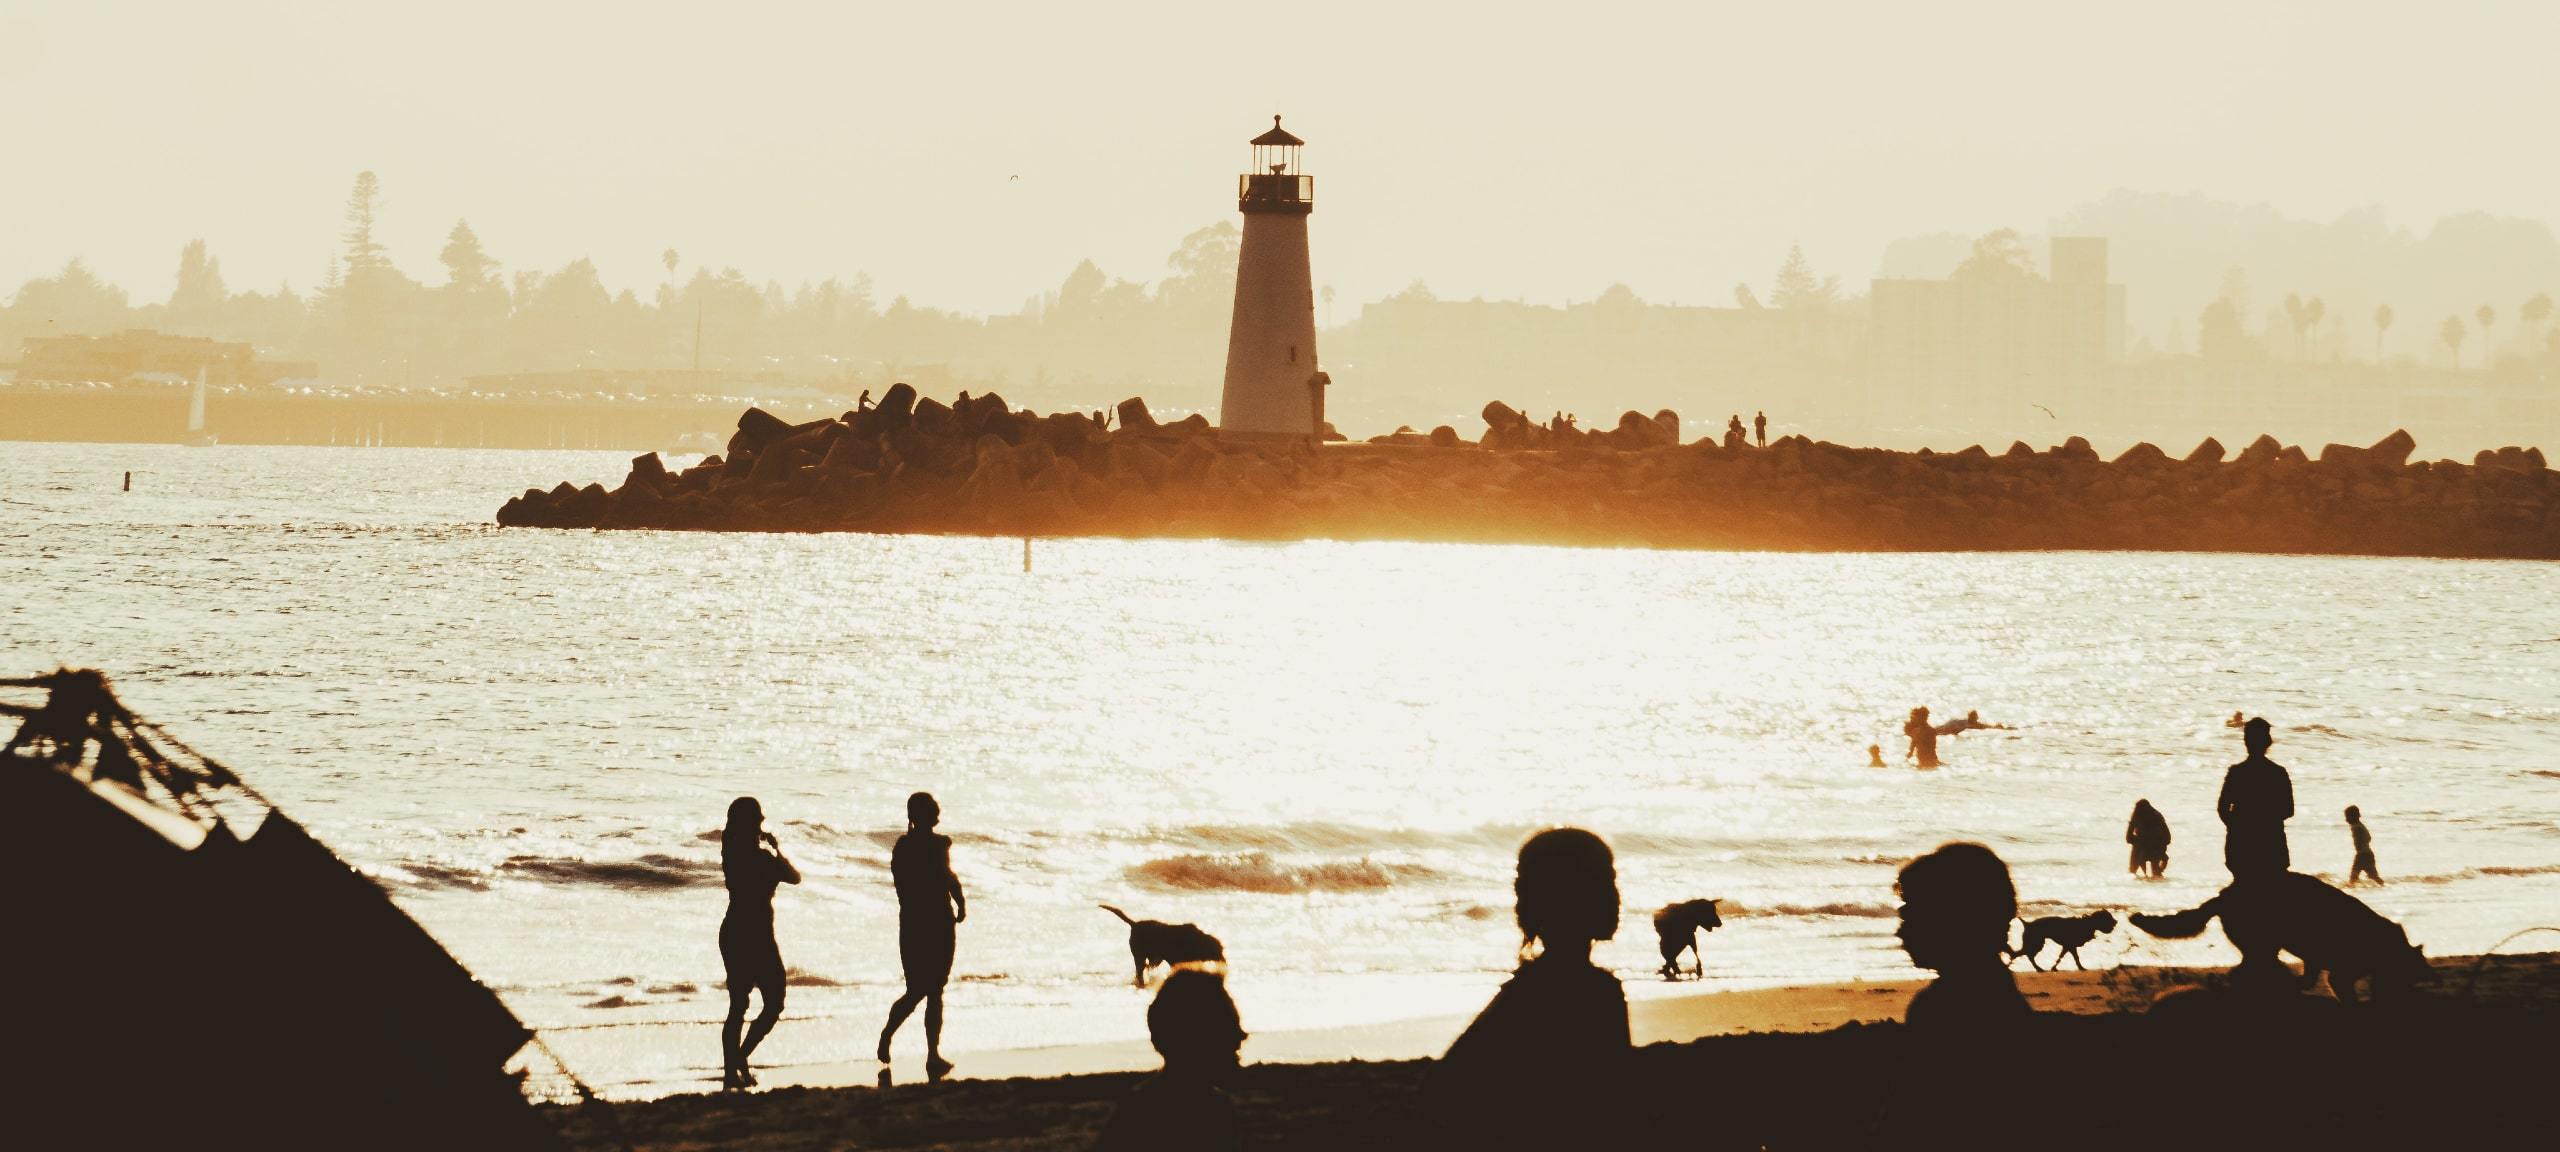 Silhouettes of beachgoers at Lighthouse Beach in Santa Cruz, CA. Photo by Luis Angelo on Unsplash